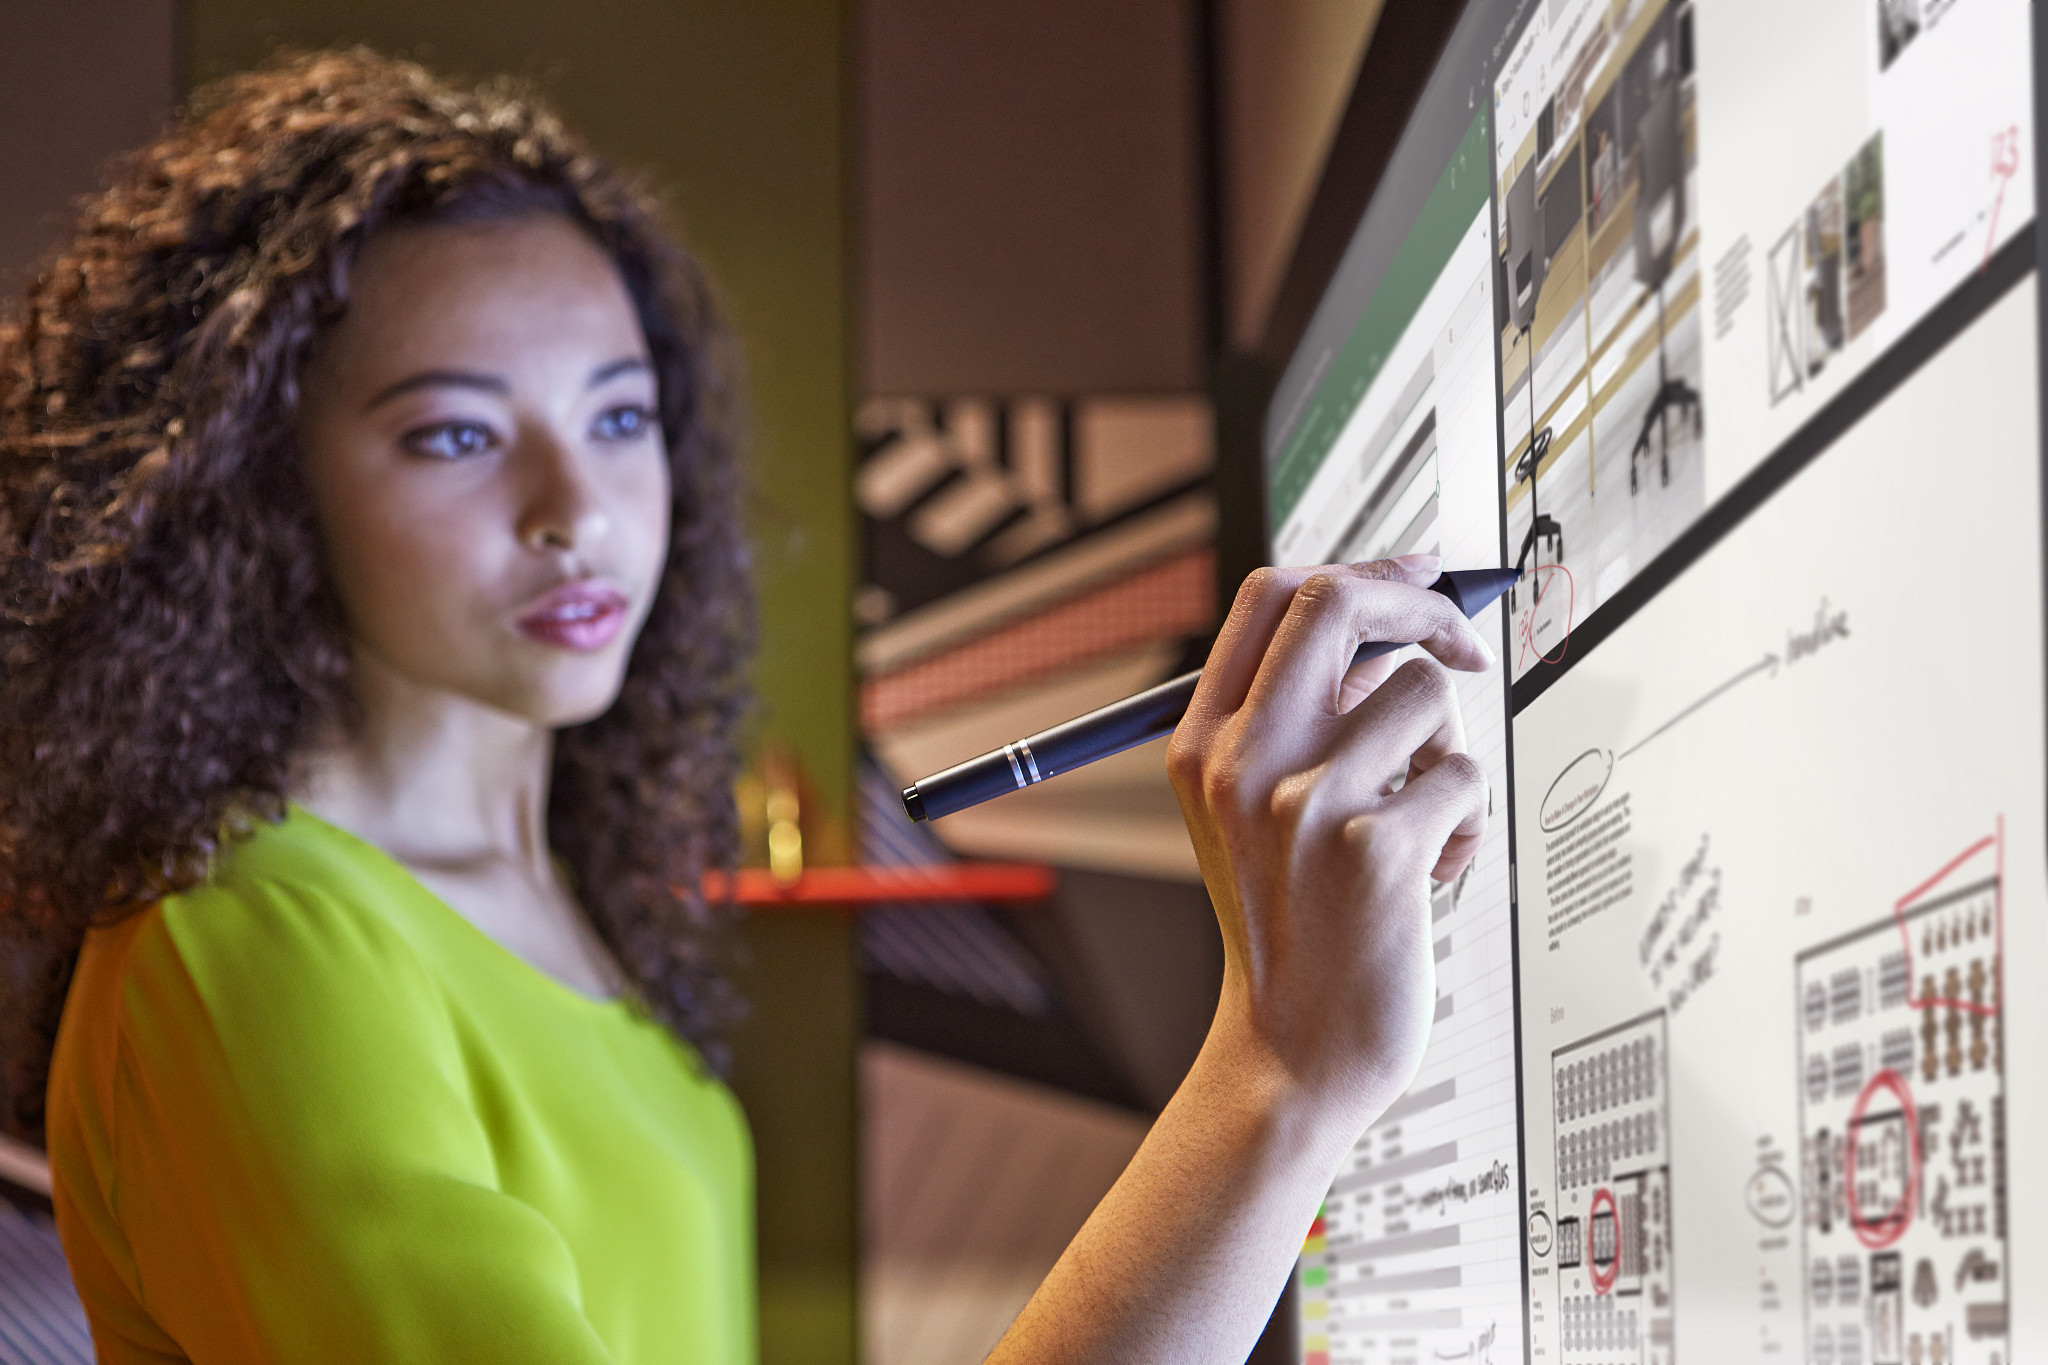 Surface Hub enables natural inking with pen and touch, with 100-point multi-touch capability.